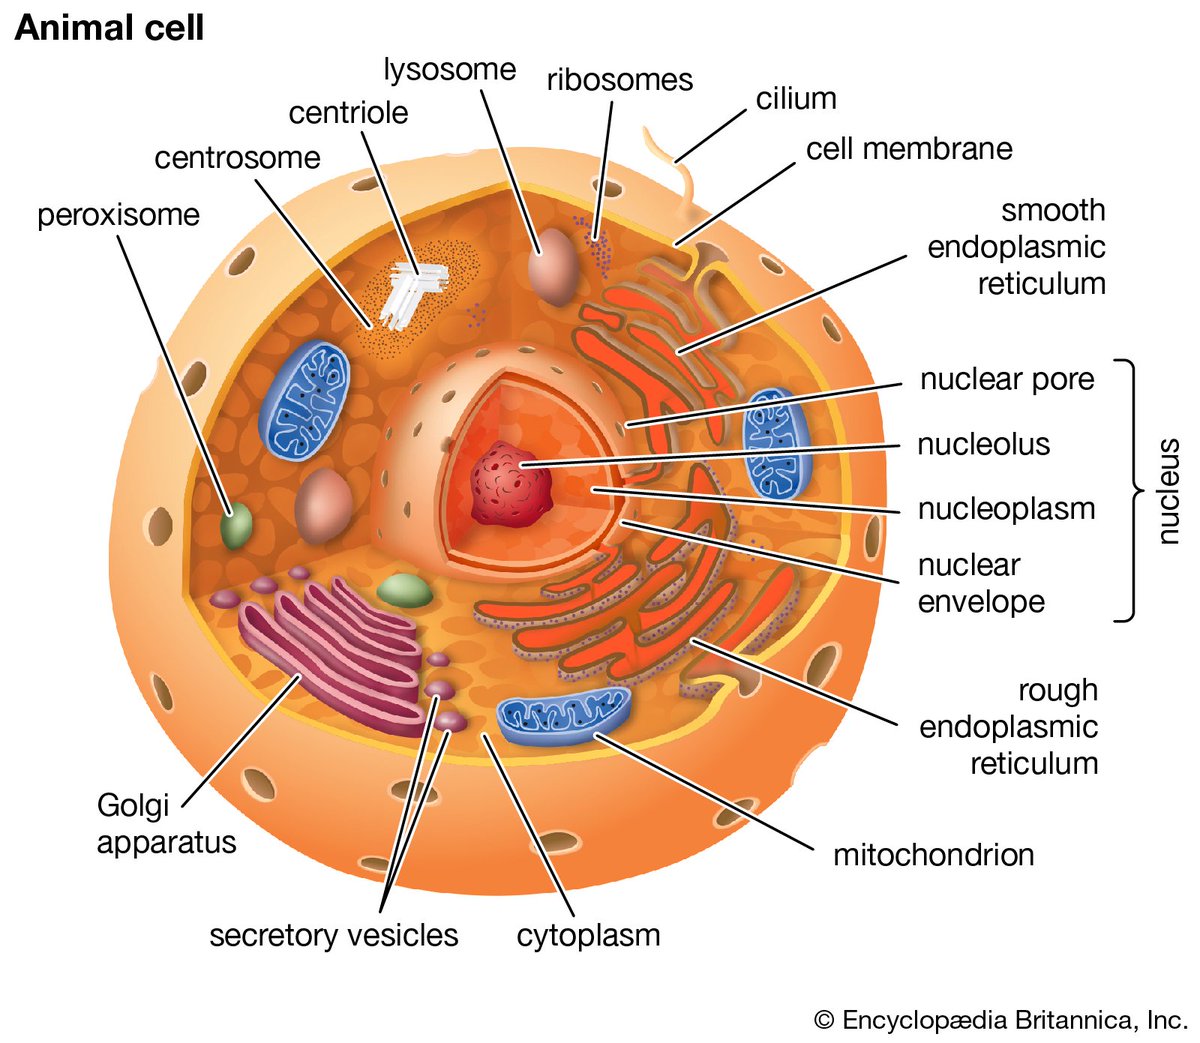 Eukaryotes are different: they have membrane-bound organelles such as mitochondria and form multicellular organisms such as you and I. So fid they evolve from archaea, or are they a third fundamental branch of the tree of life?